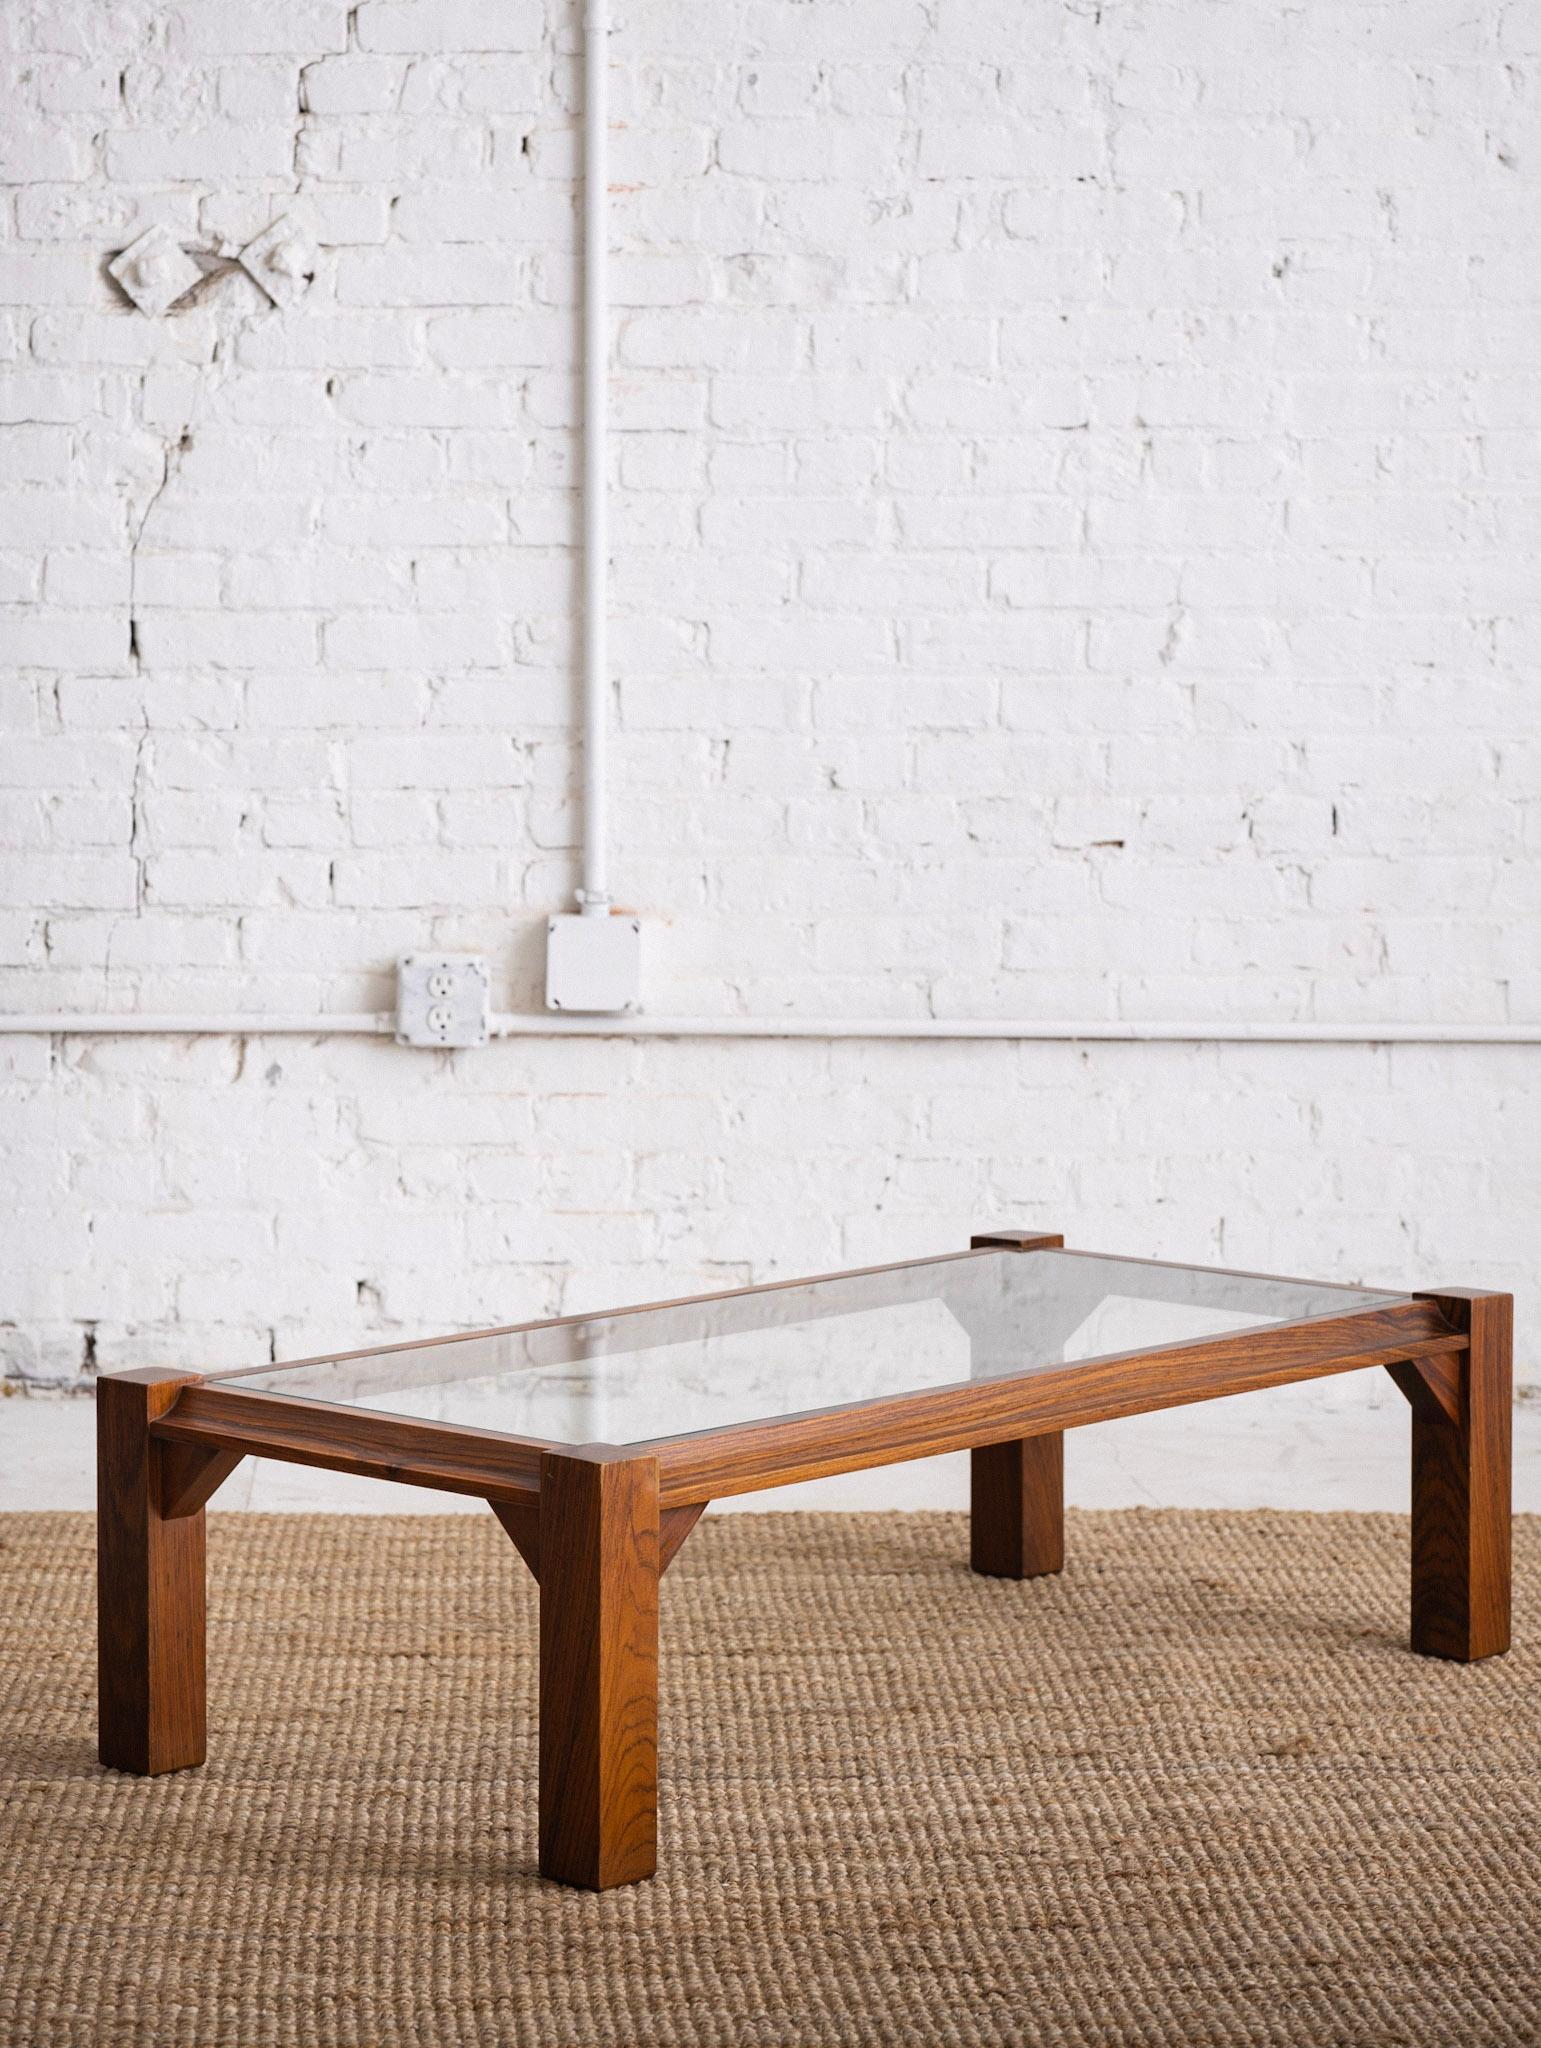 Mid century Italian coffee table. Solid rosewood frame with glass top. Rich wood grain detail. Sourced outside of Florence, Italy.